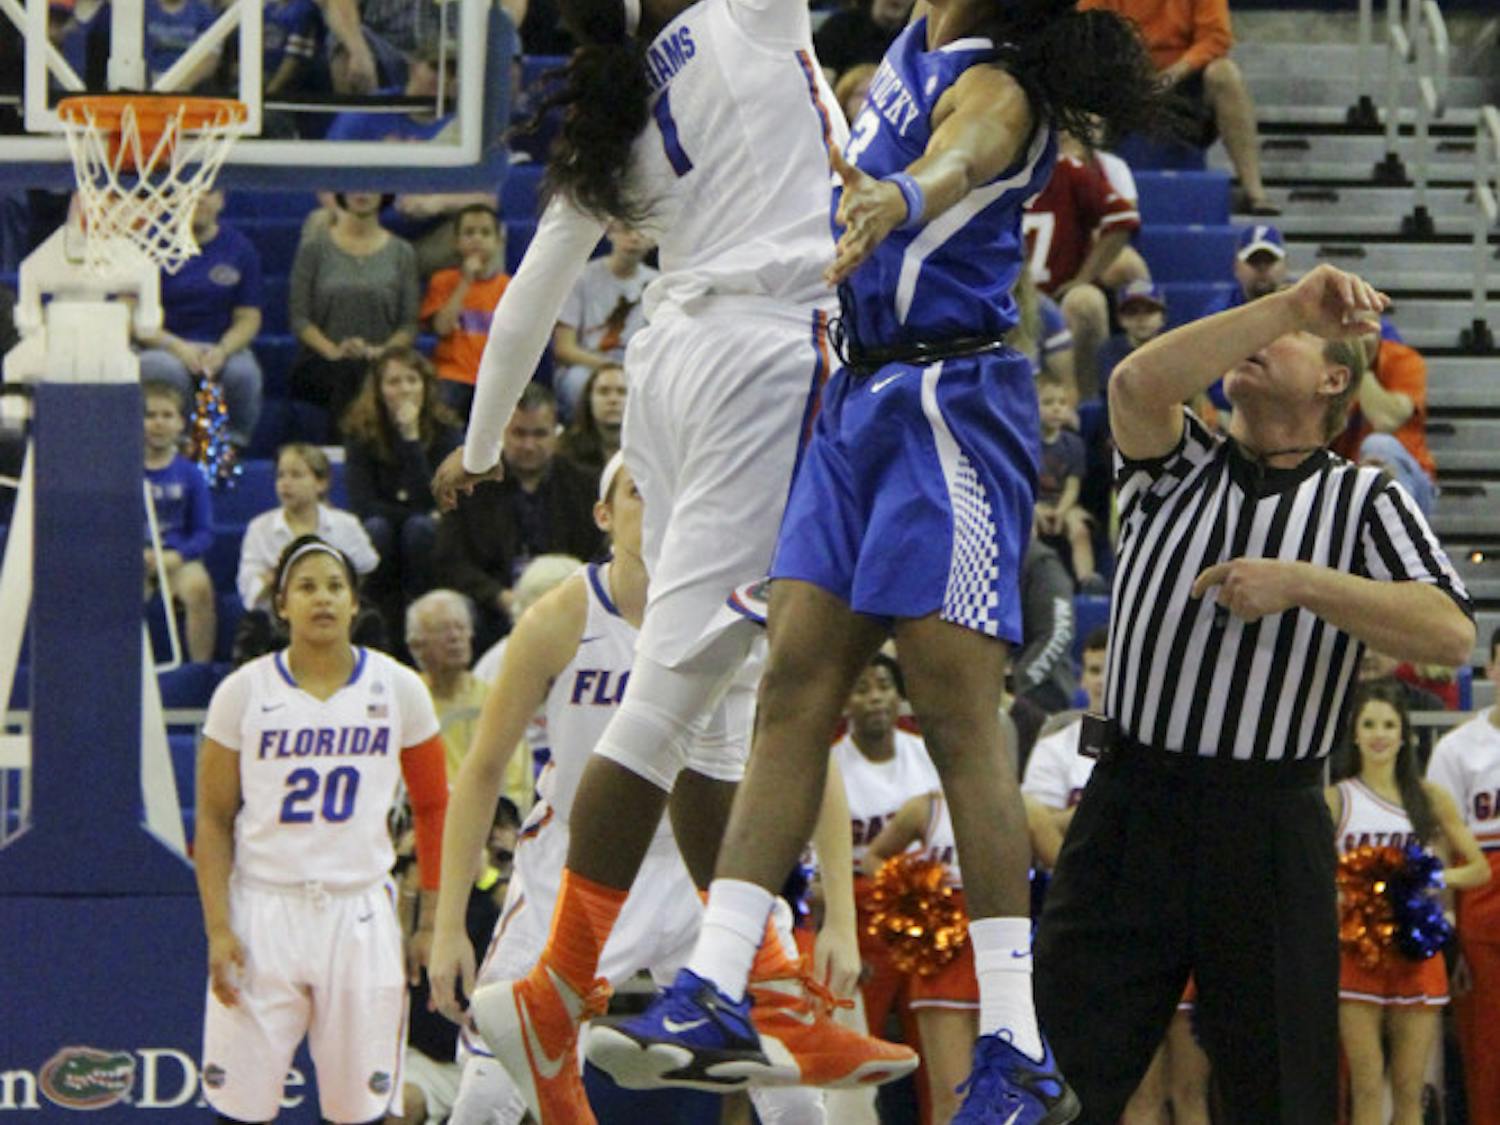 Ronni Williams jumps during the tipoff of Florida's 85-79 win over Kentucky on Jan. 31, 2016, in the O'Connell Center.